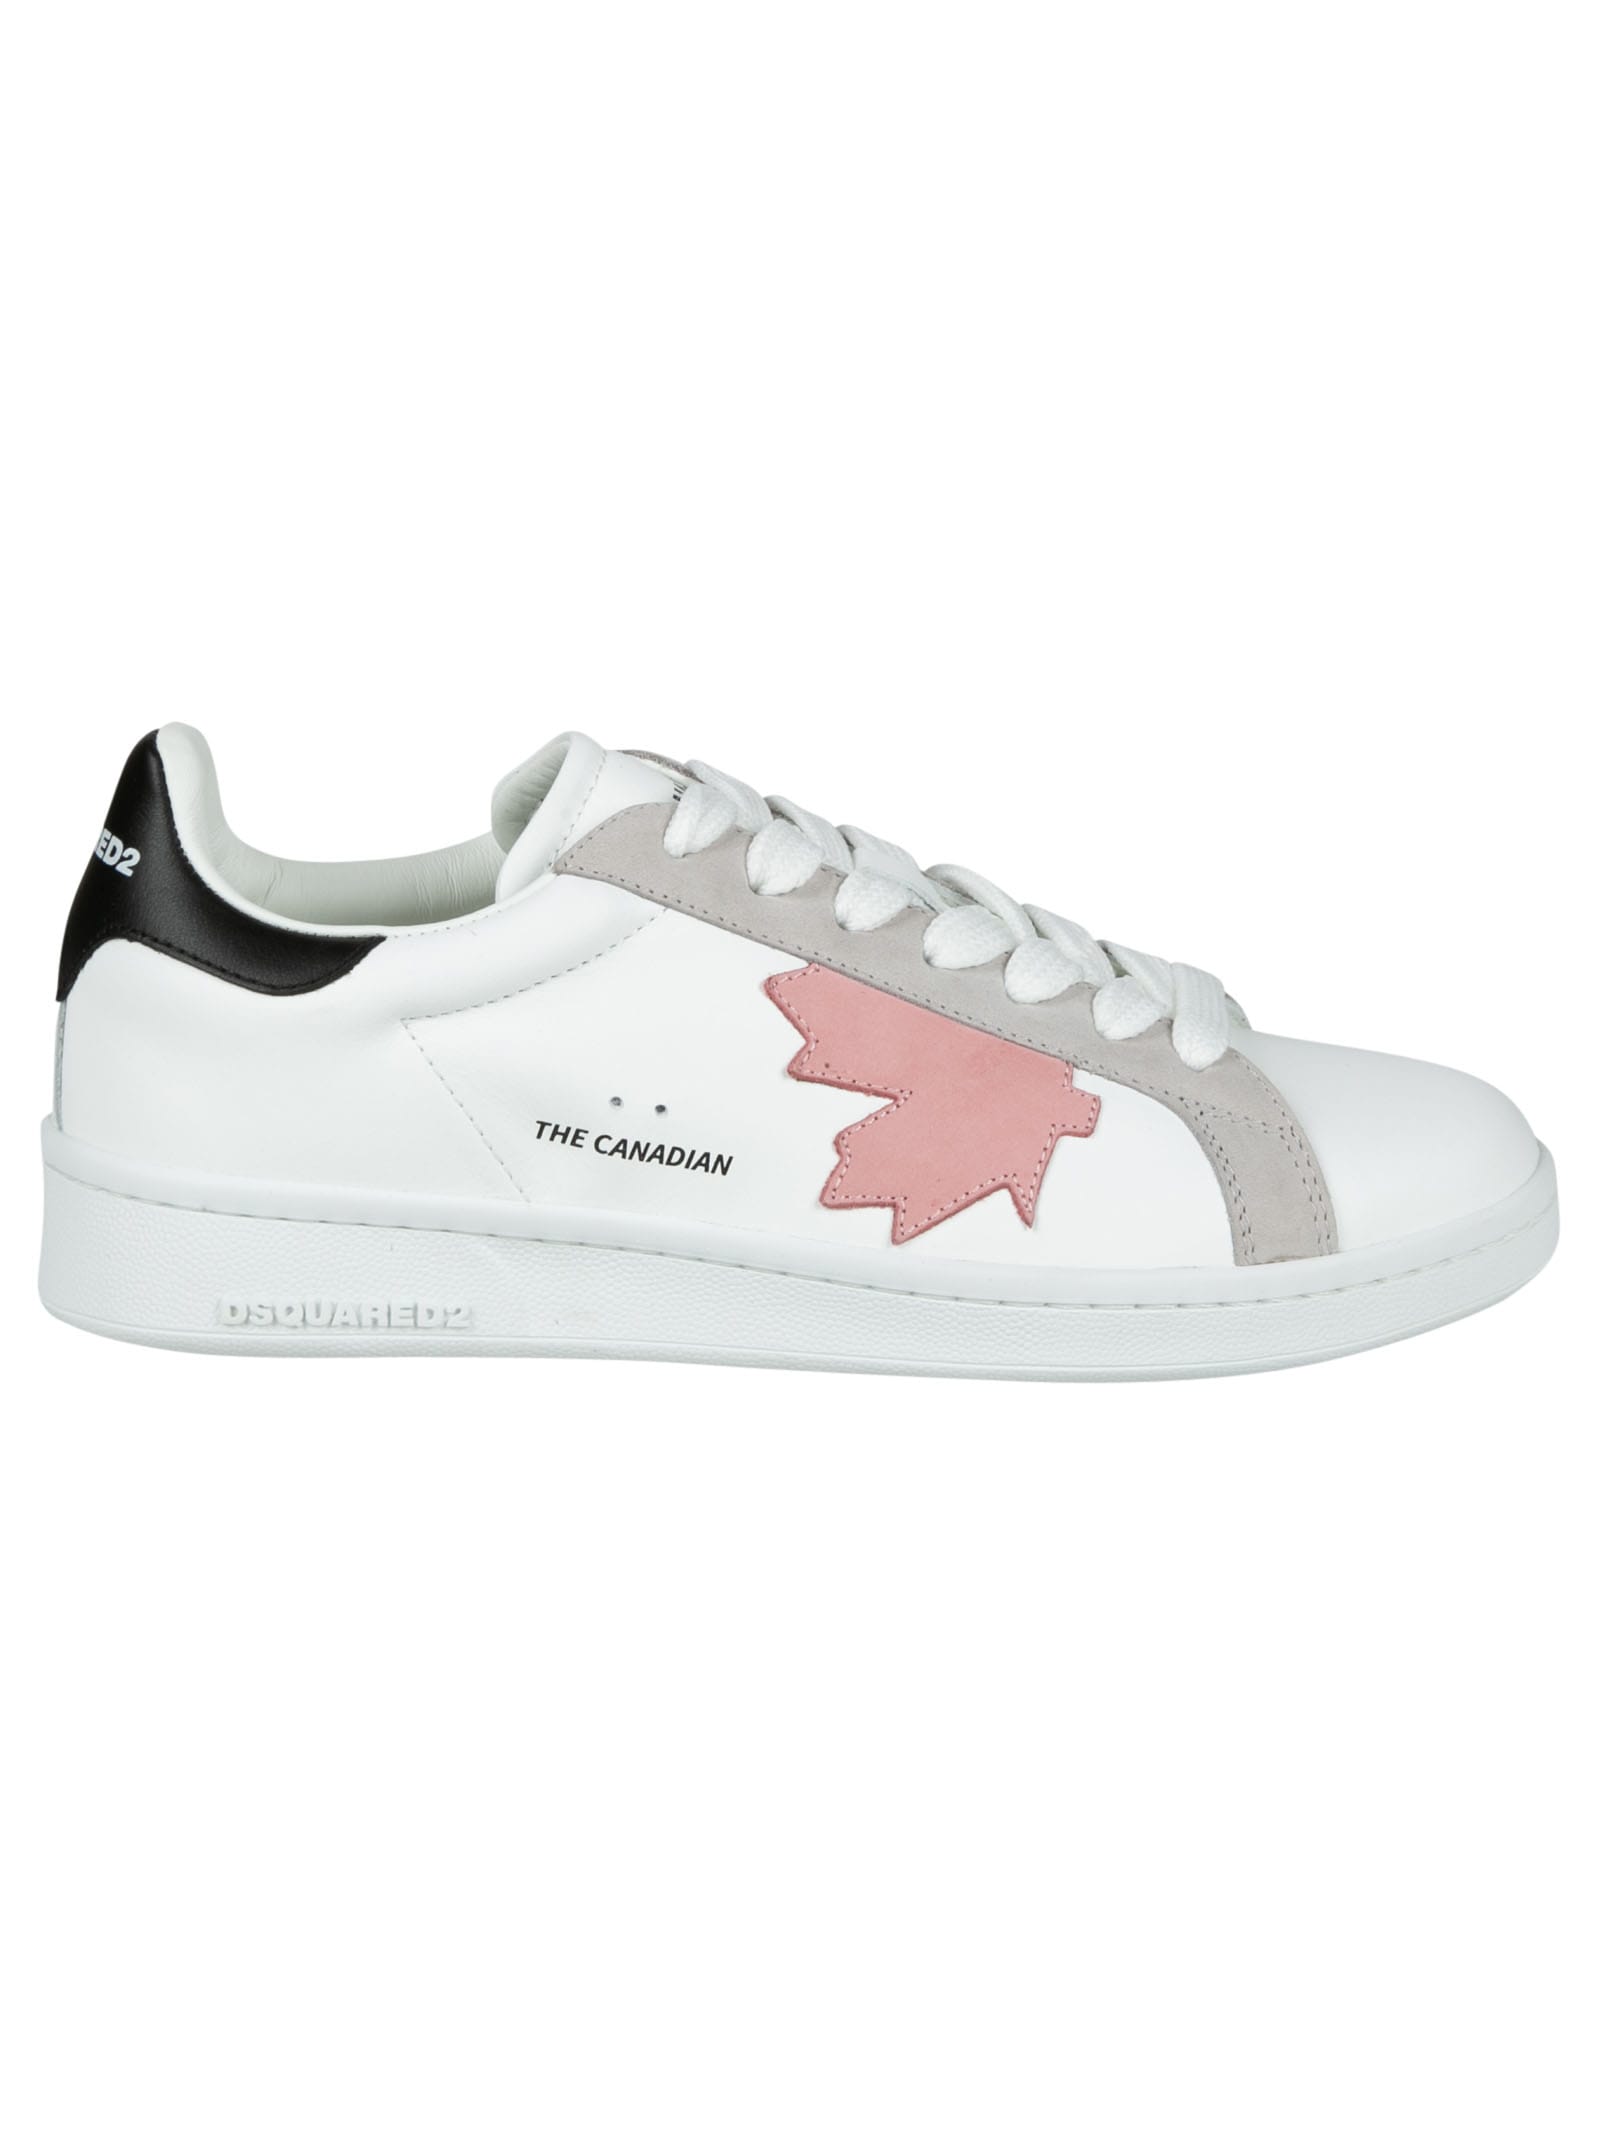 Dsquared2 Maple Leaf Patched Low Sneakers